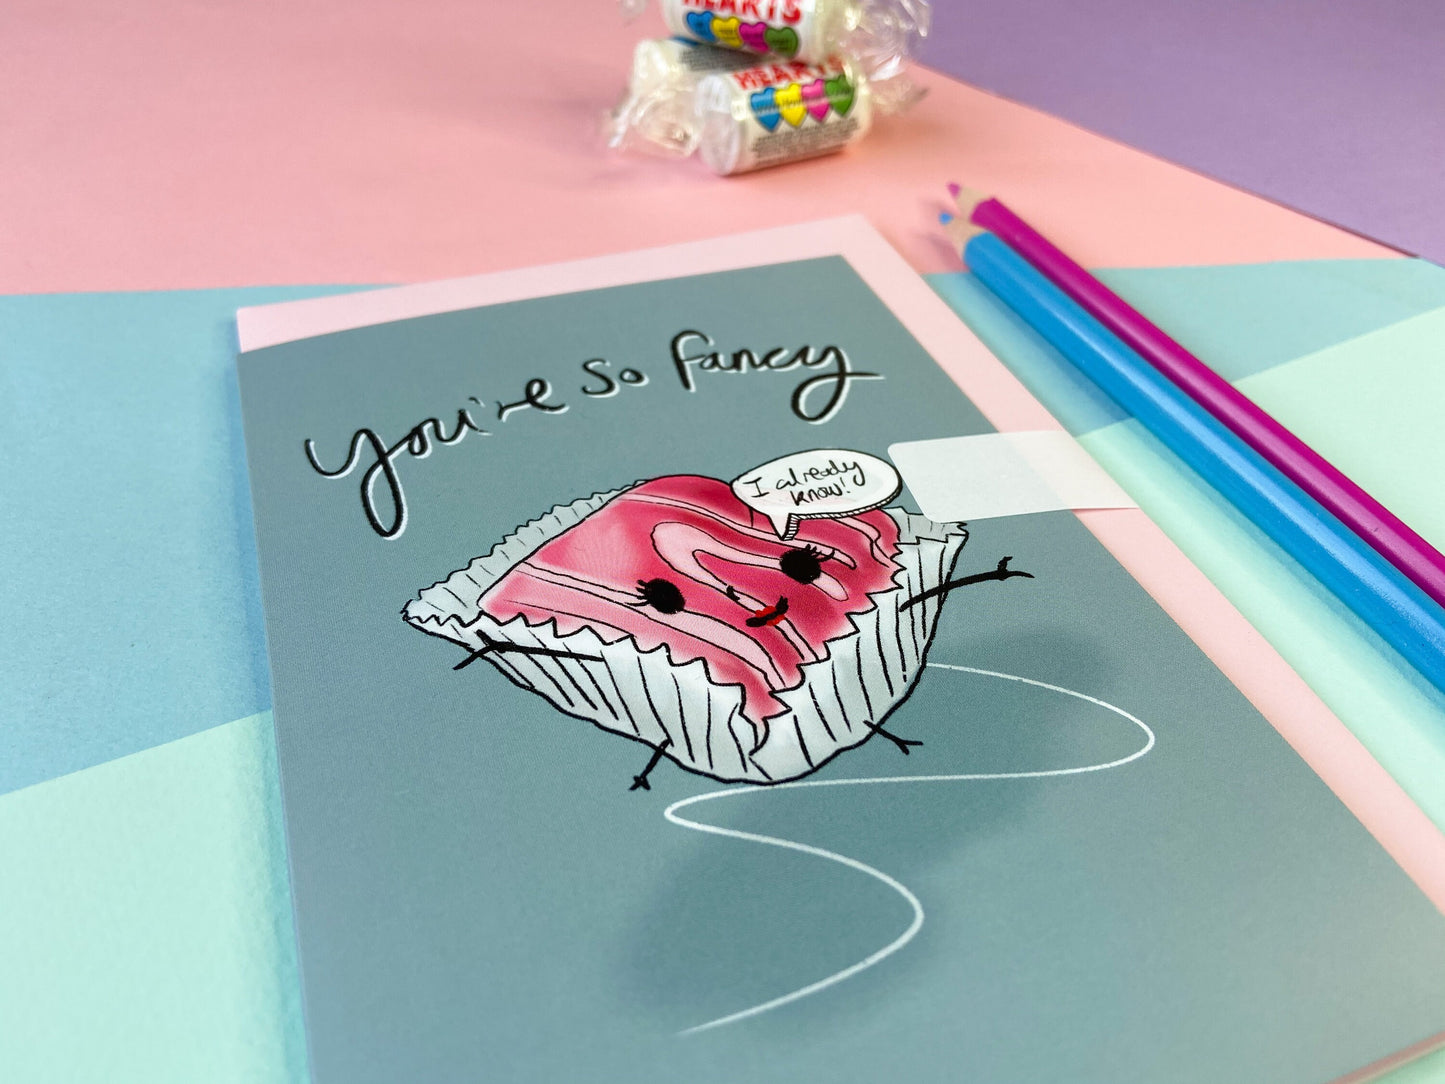 You're so Fancy Valentine's Card